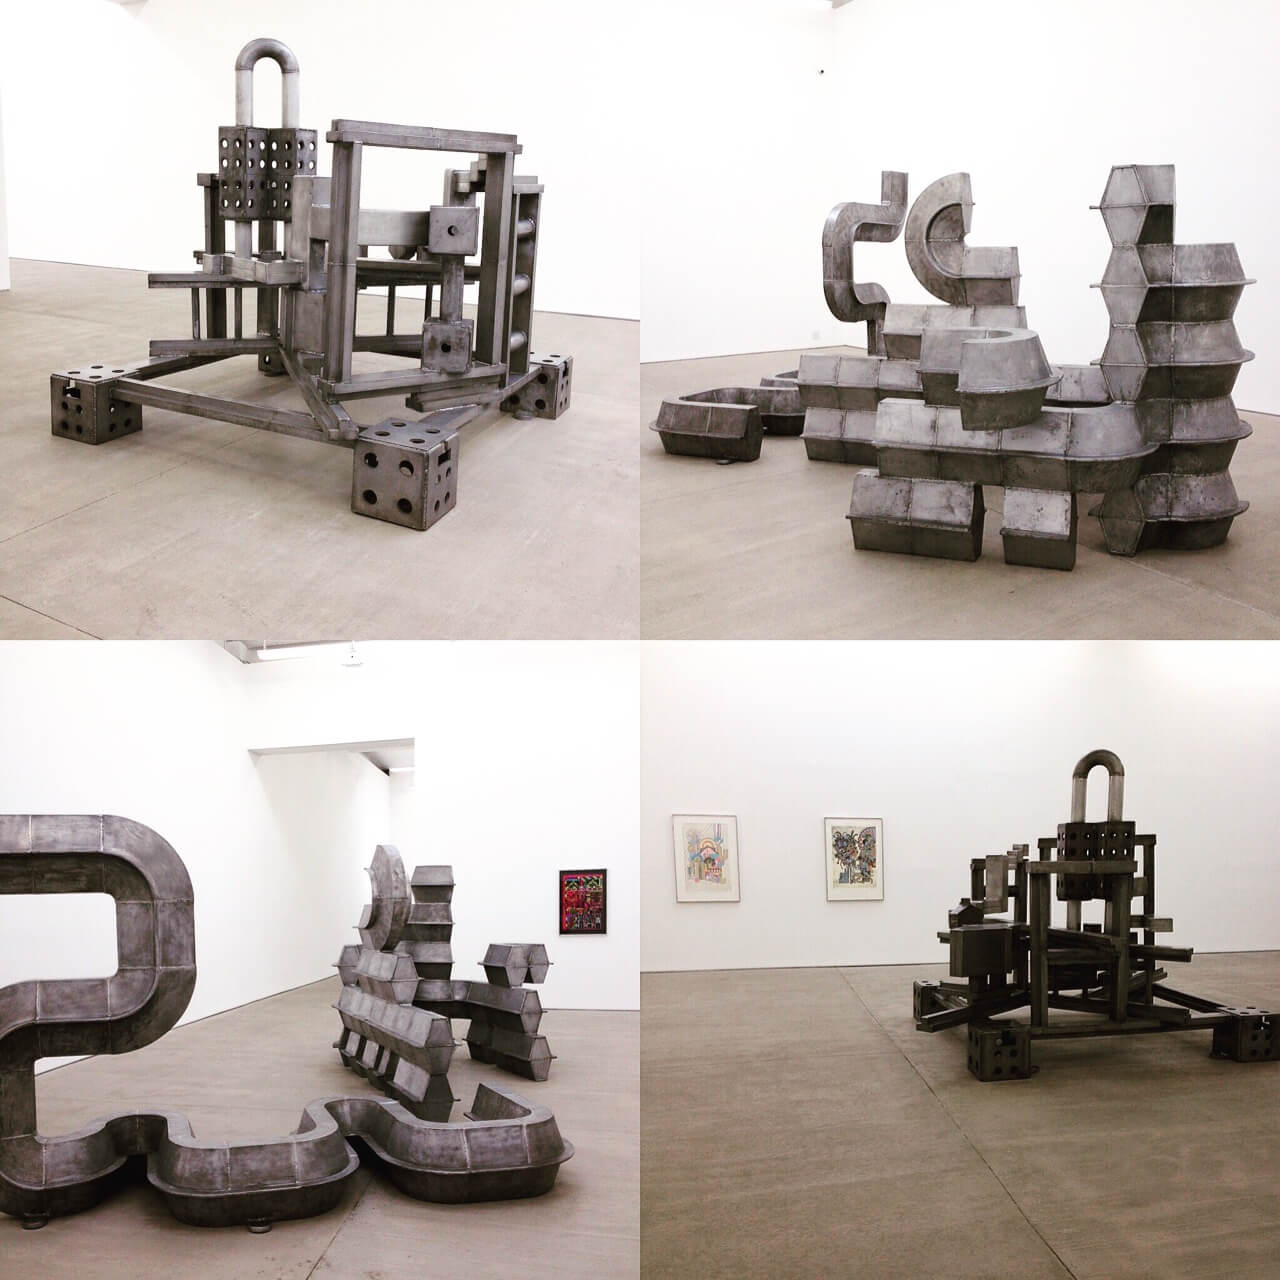 Eduardo Paolozzi at Clearing Gallery.